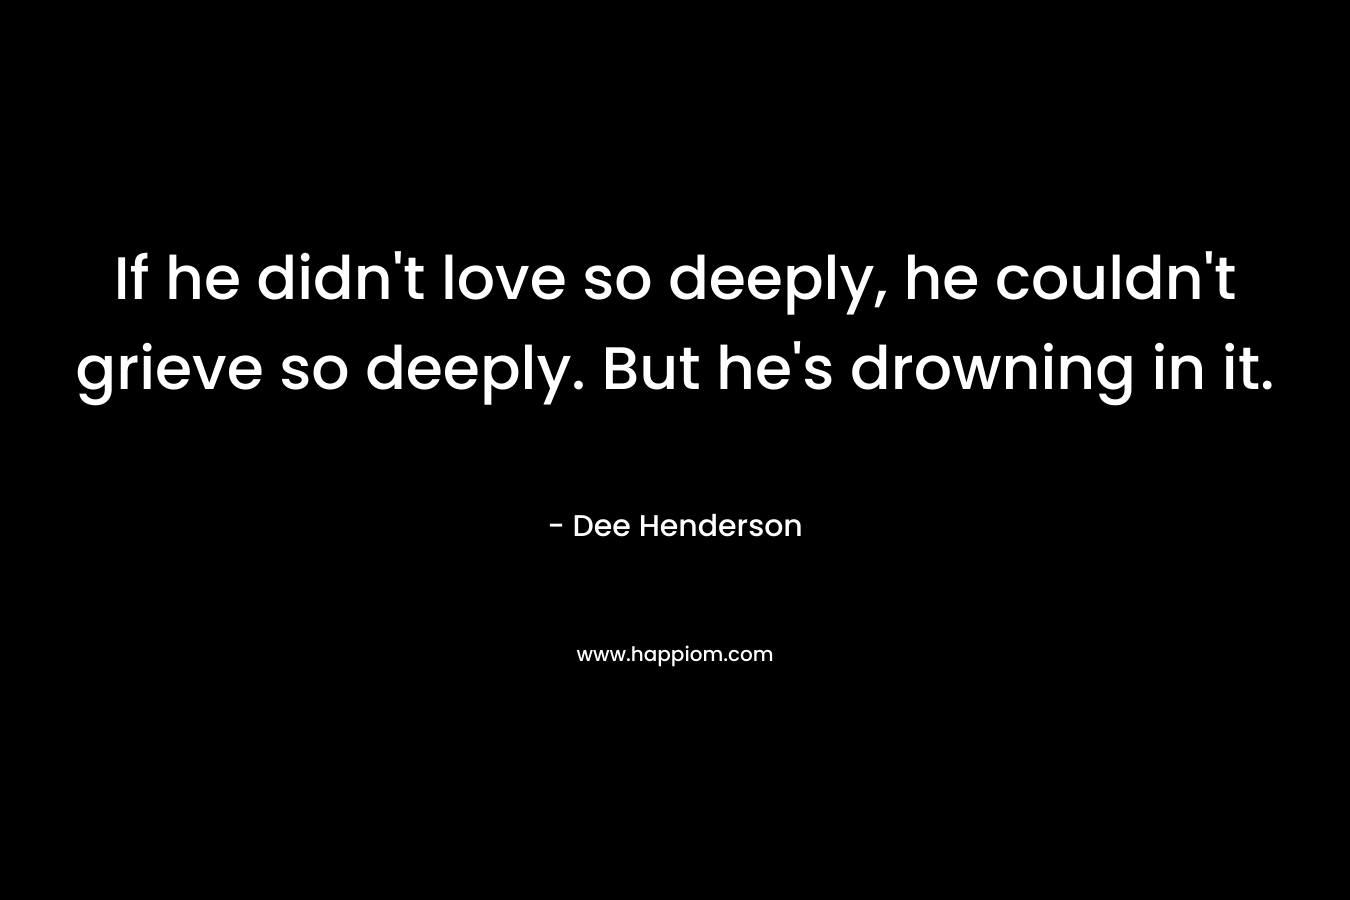 If he didn’t love so deeply, he couldn’t grieve so deeply. But he’s drowning in it. – Dee Henderson